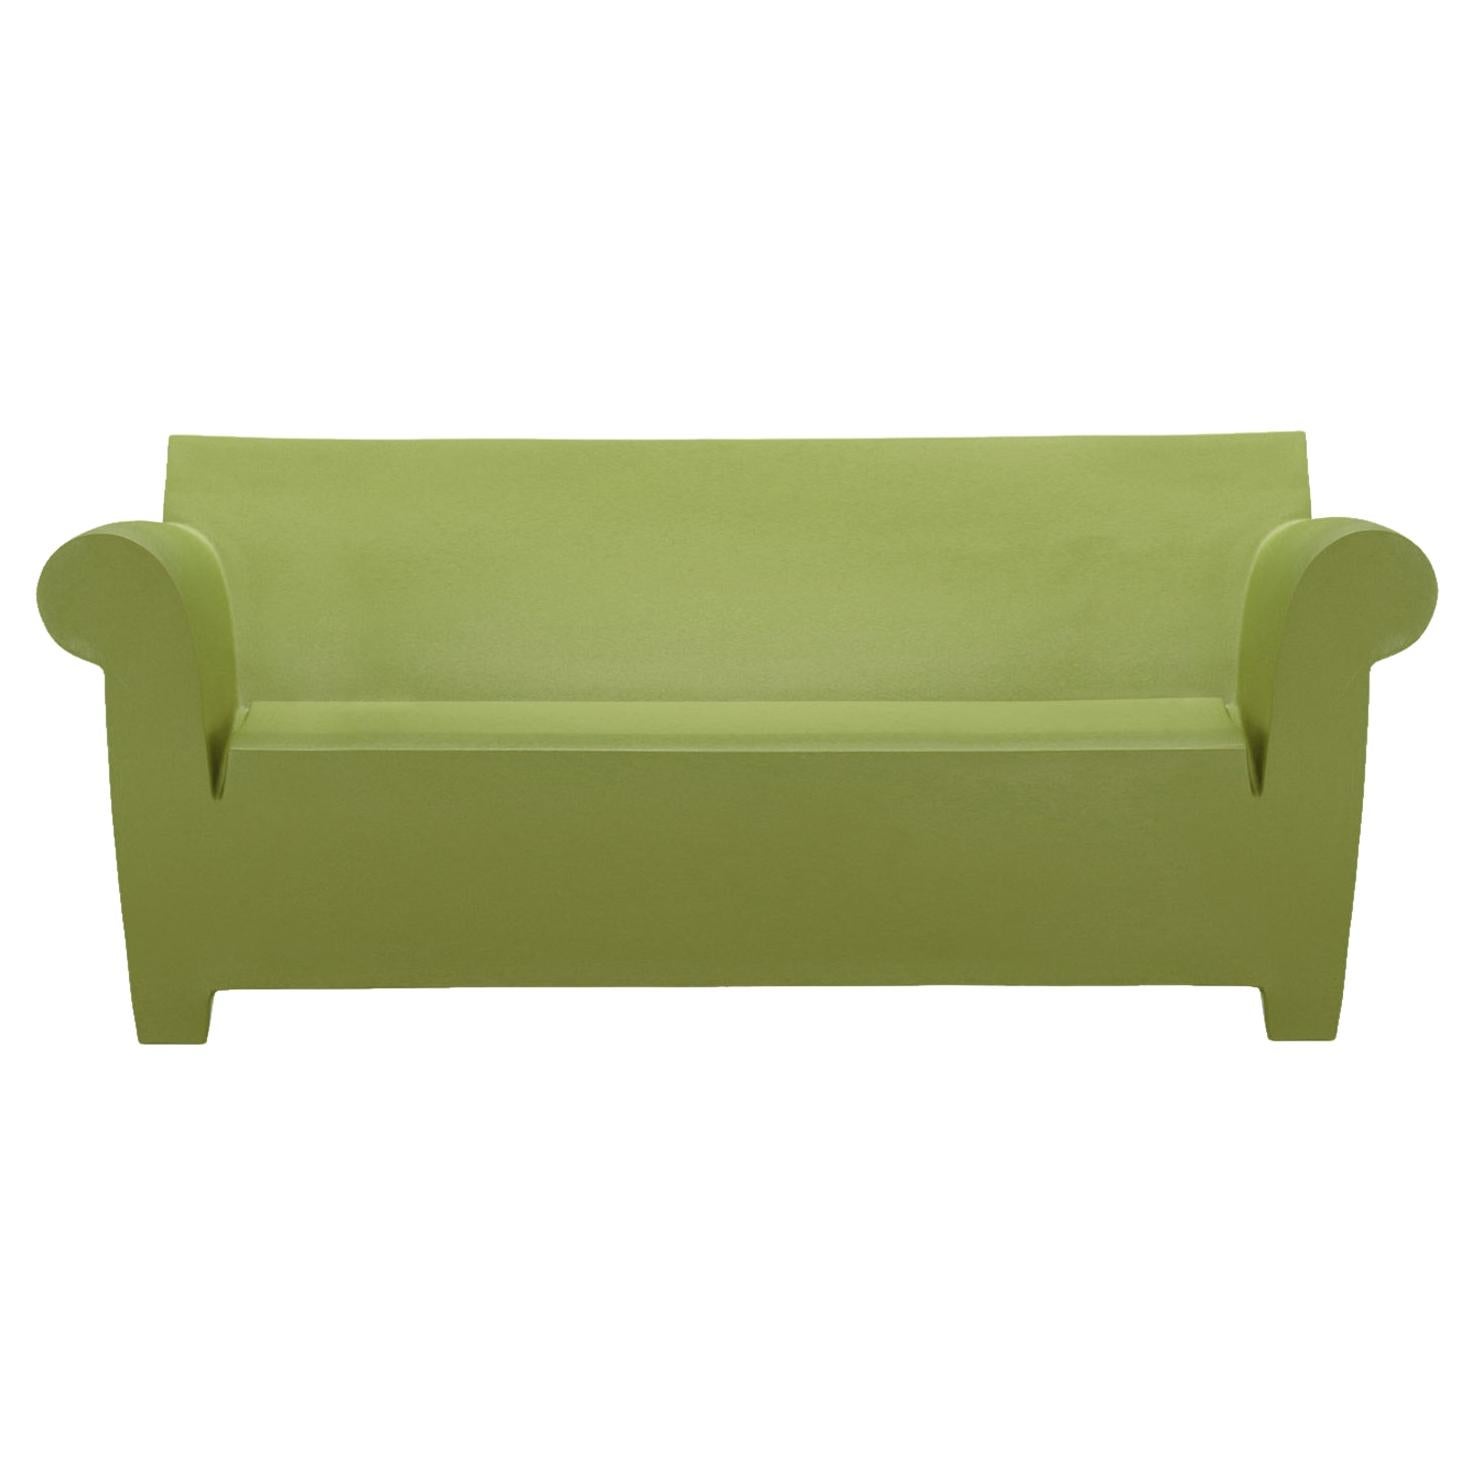 Kartell Bubble Club 2-Seat Sofa in Green by Philippe Starck